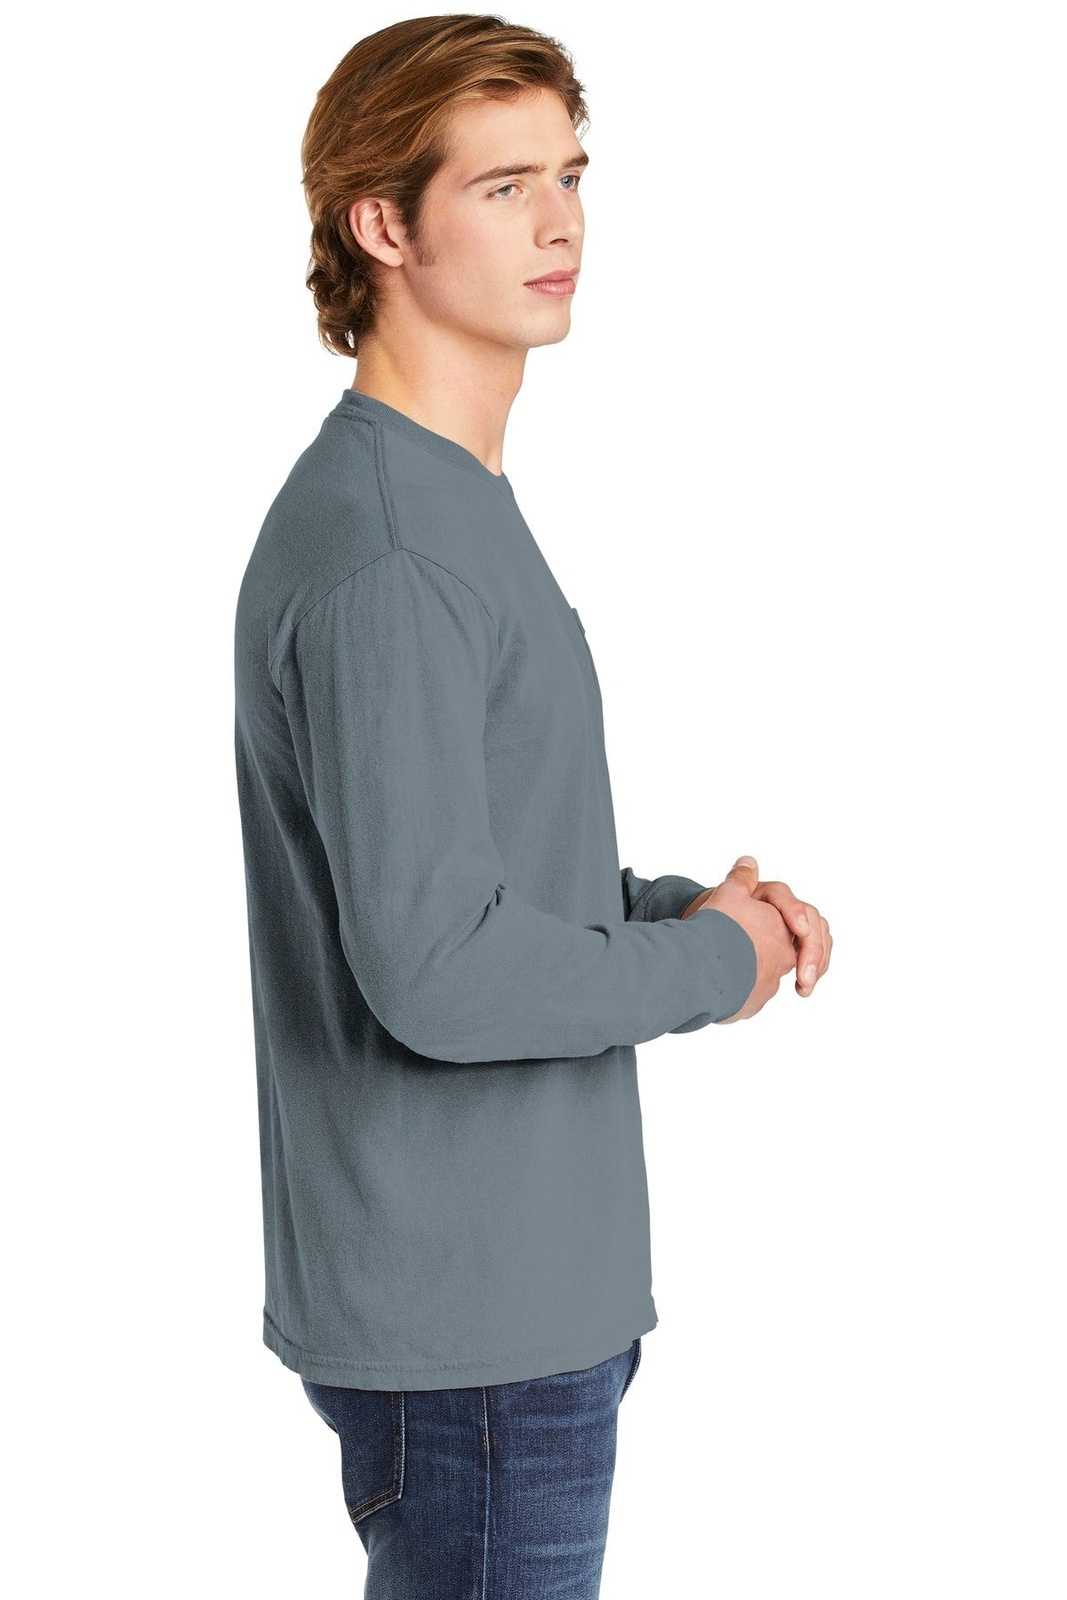 Comfort Colors 4410 Heavyweight Ring Spun Long Sleeve Pocket Tee - Granite - HIT a Double